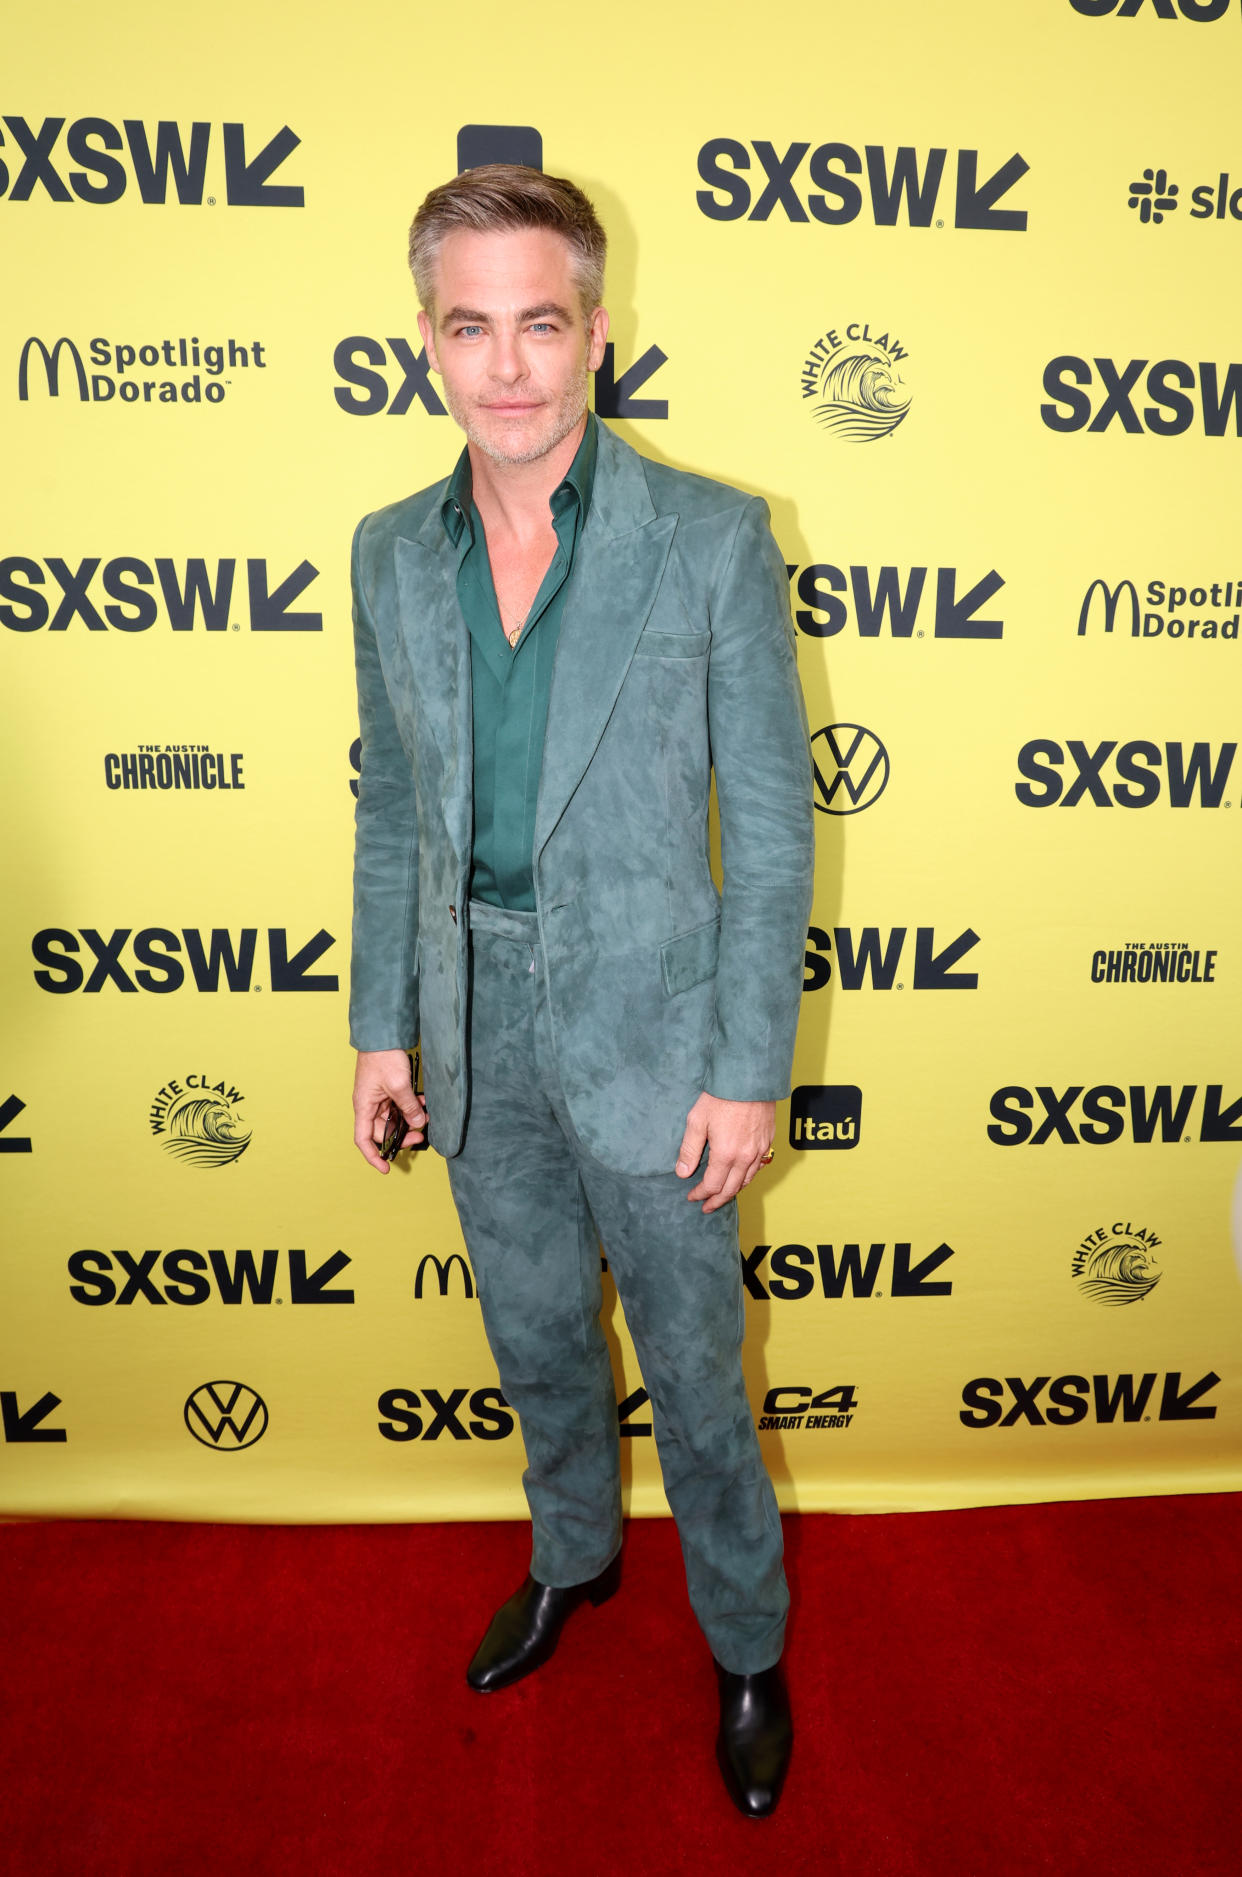 AUSTIN, TEXAS - MARCH 10: Chris Pine attends the premiere of Dungeons And Dragons at the Paramount Theatre during the 2023 SXSW Conference And Festival at the Austin Convention Center on March 10, 2023 in Austin, Texas. (Photo by Gary Miller/WireImage)